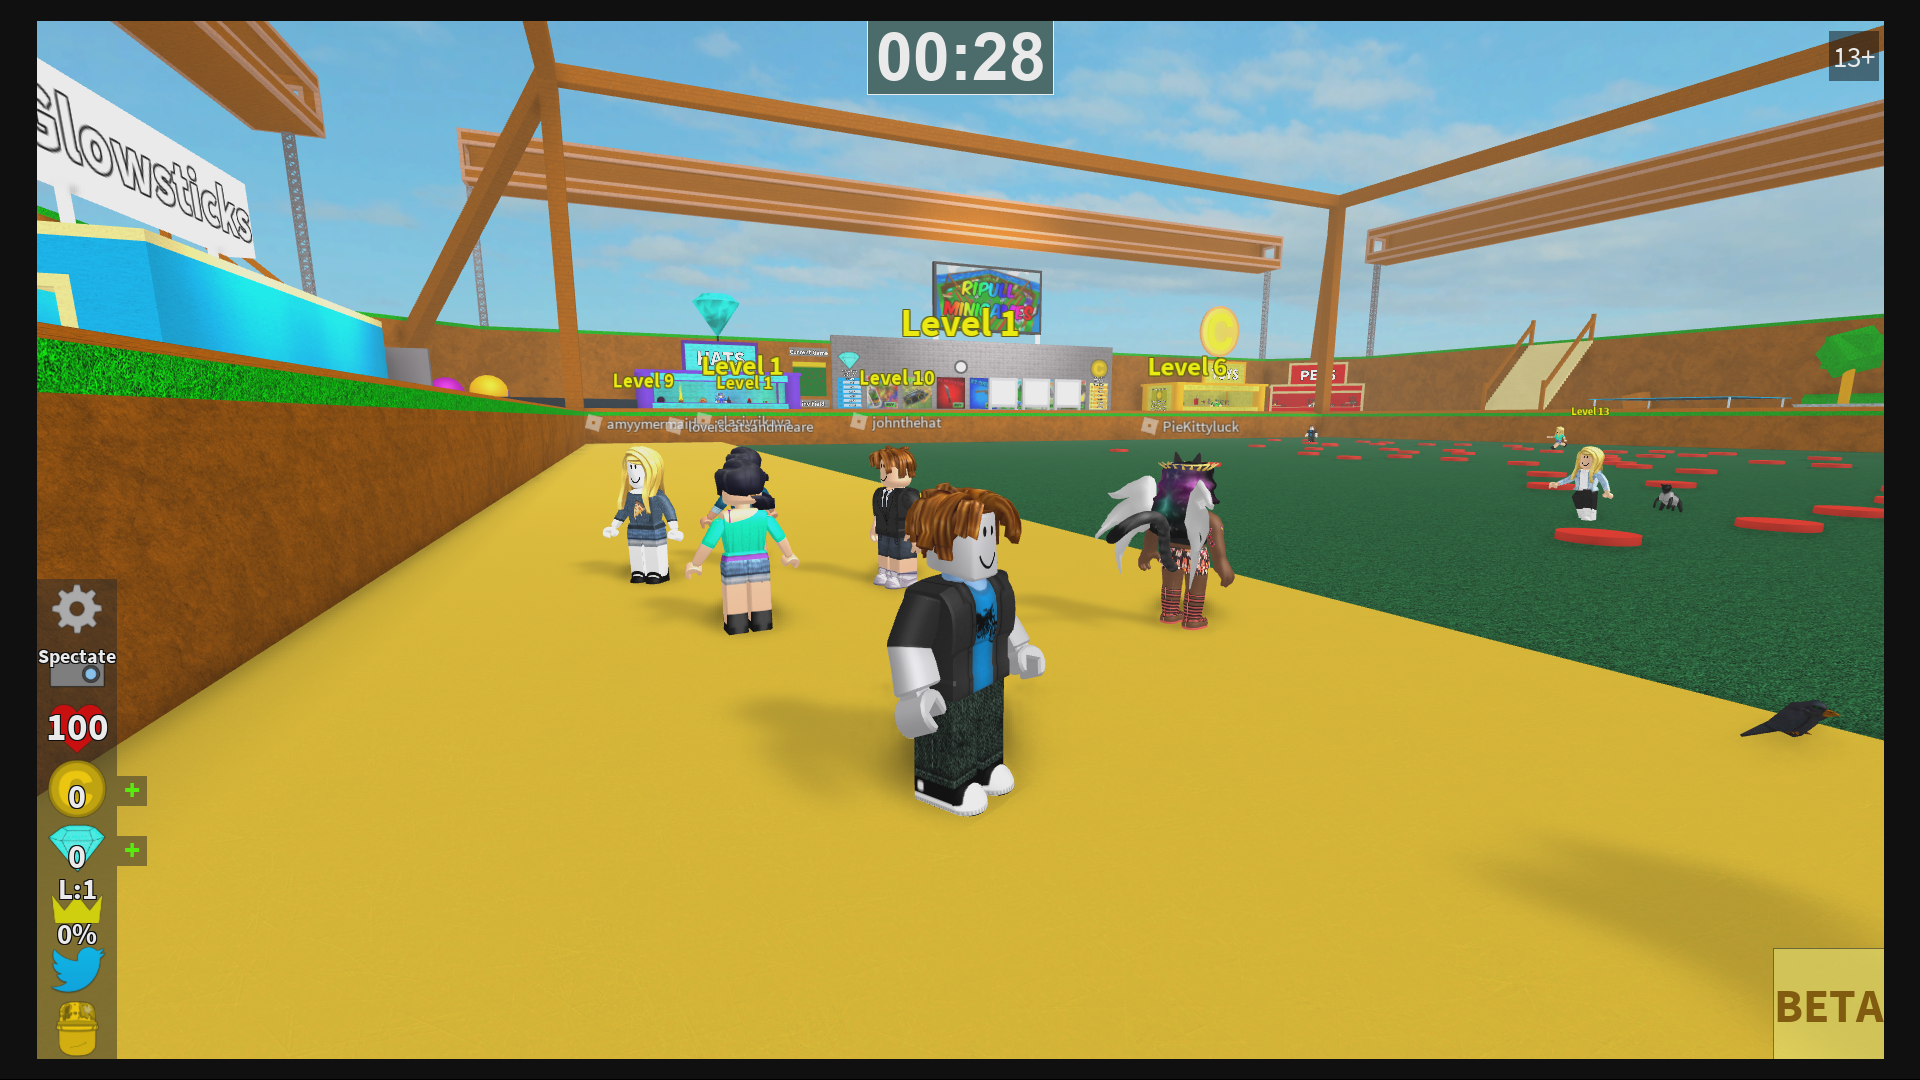 Can You Play Roblox On Xbox With Pc Players Roblox Introduces Cross Platform Play On Xbox One Roblox Blog